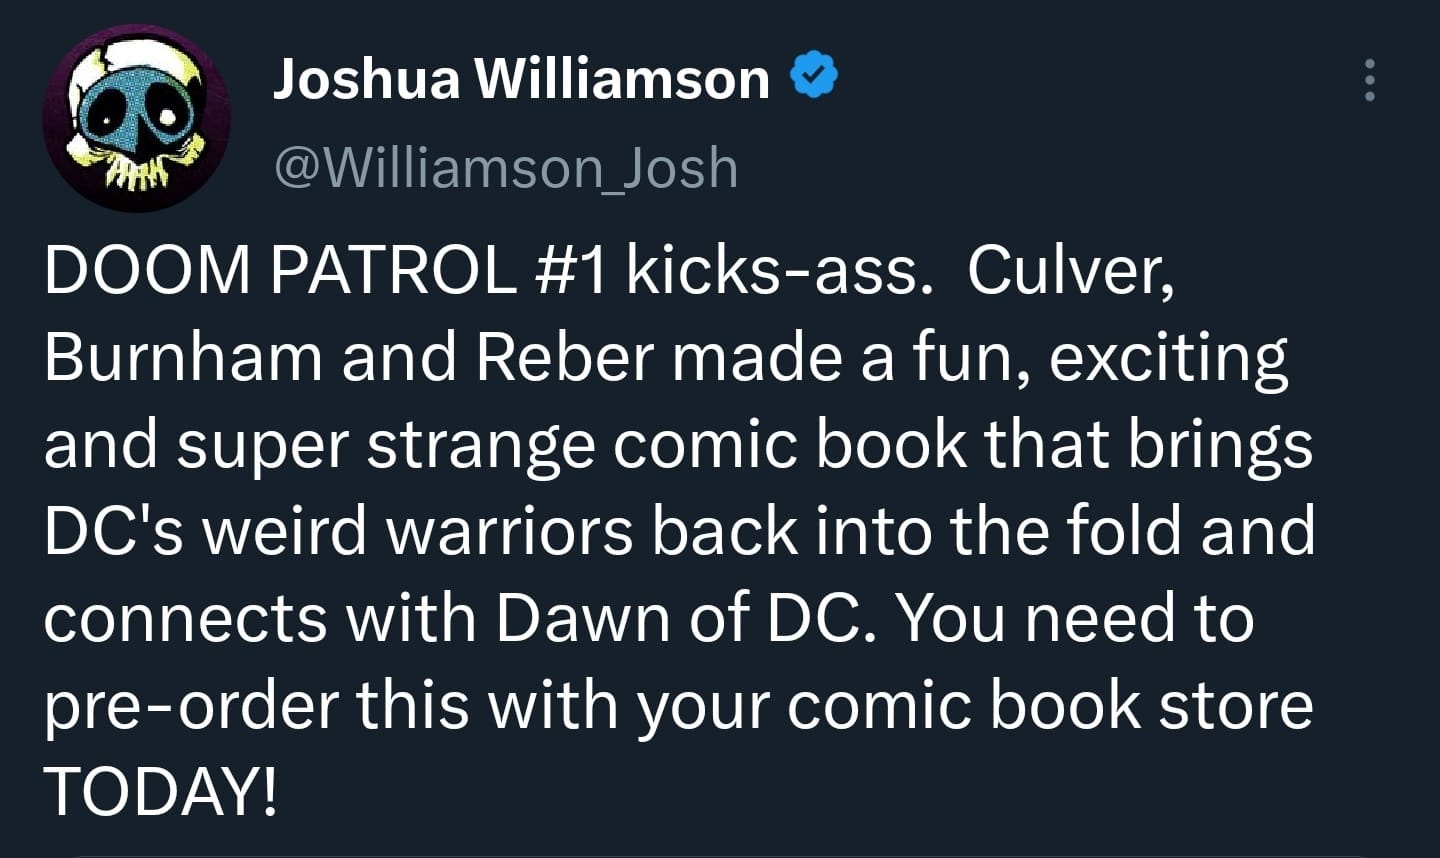 May be a Twitter screenshot of text that says 'Joshua Williamson @Williamson Josh DOOM PATROL #1 kicks-ass. Culver, Burnham and Reber made a fun, exciting and super strange comic book that brings DC's weird warriors back into the fold and connects with Dawn of DC. You need to pre-order this with your comic book store TODAY!'